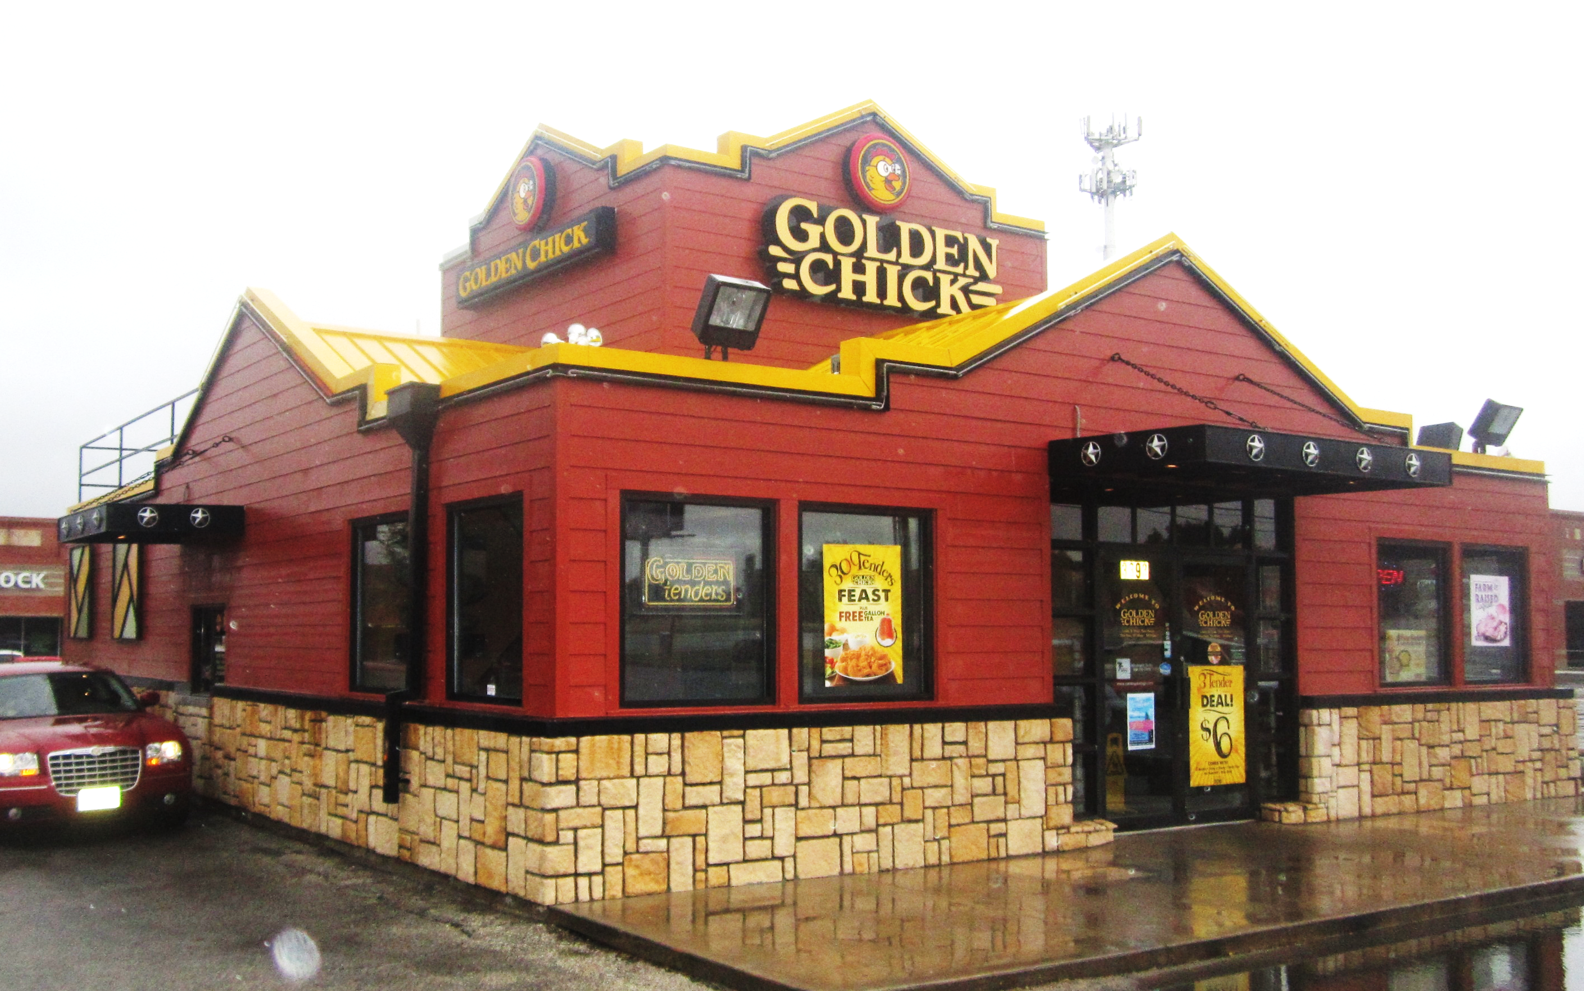 Golden Chick storefront.  Your local Golden Chick fast food restaurant in San Angelo, Texas